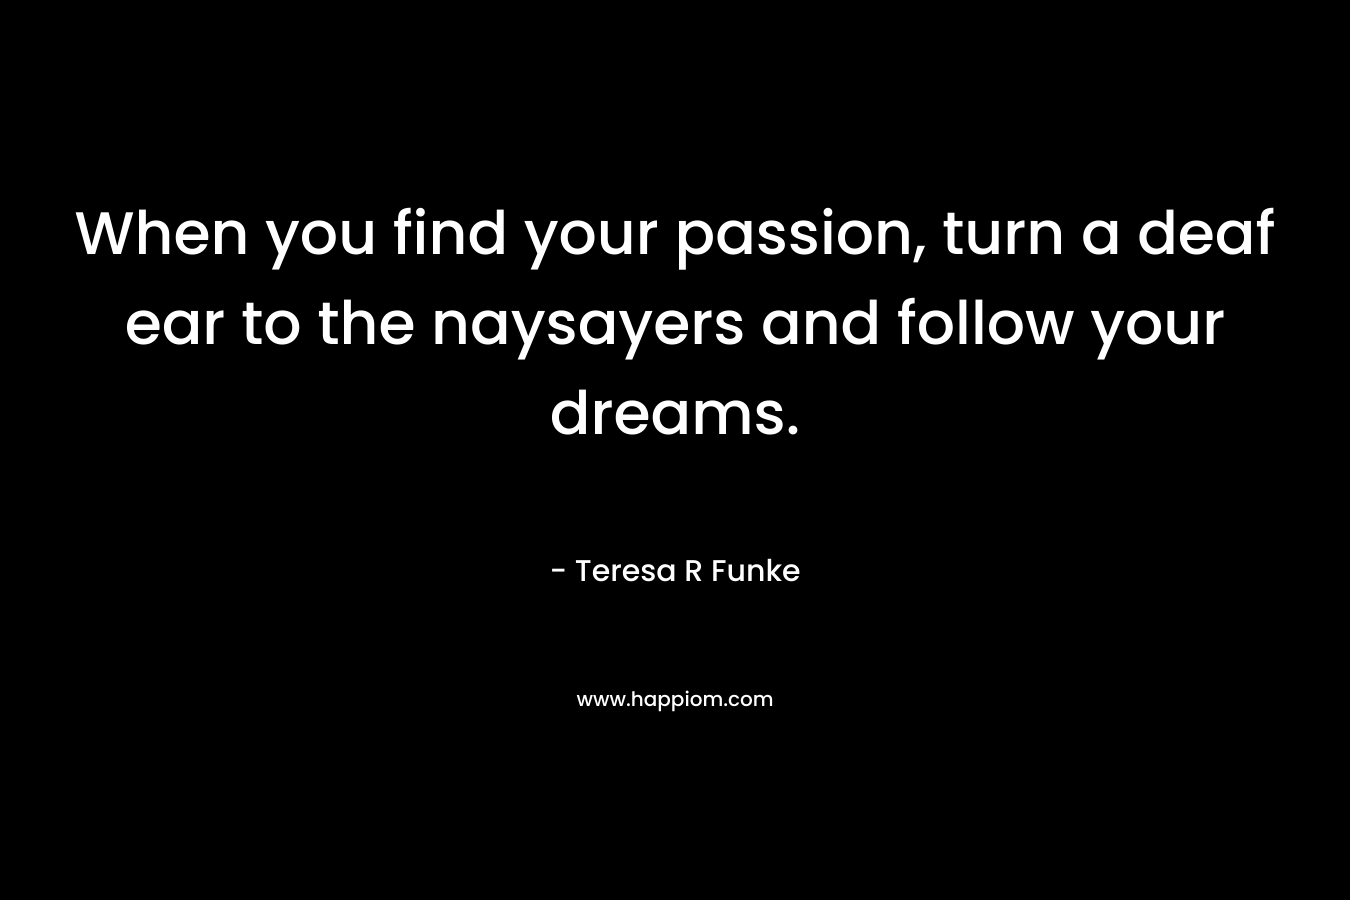 When you find your passion, turn a deaf ear to the naysayers and follow your dreams. – Teresa R Funke